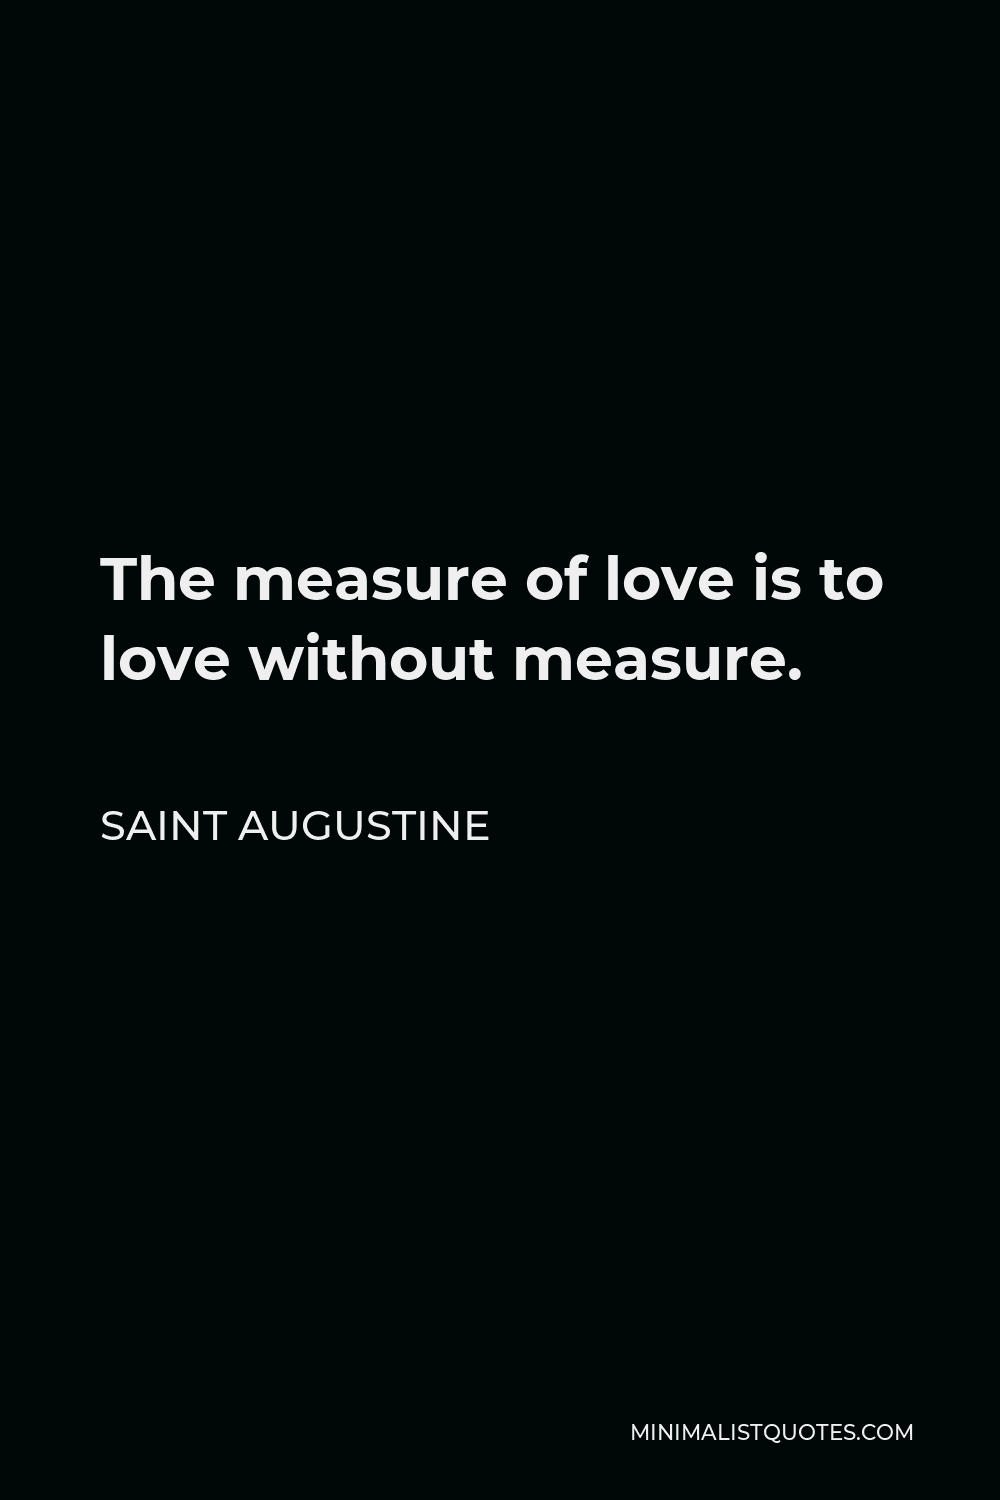 Saint Augustine Quote - The measure of love is to love without measure.